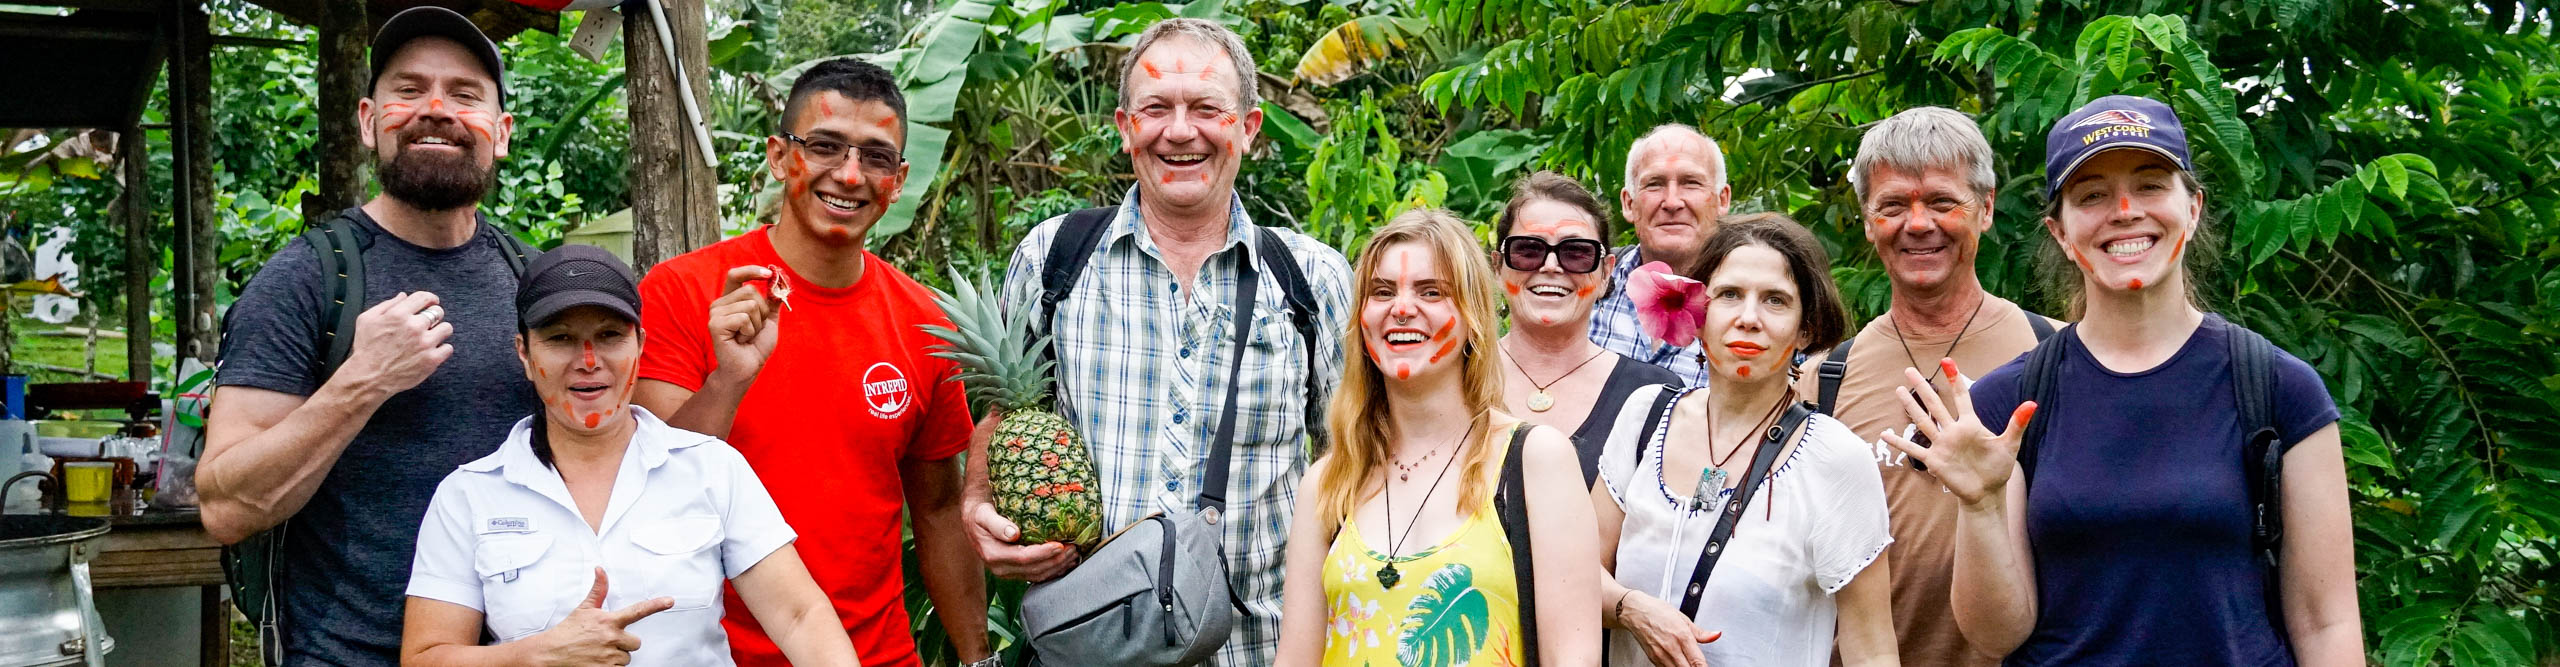 Group smiling at camera, with painted faces and holding pineapples, Costa Rica 